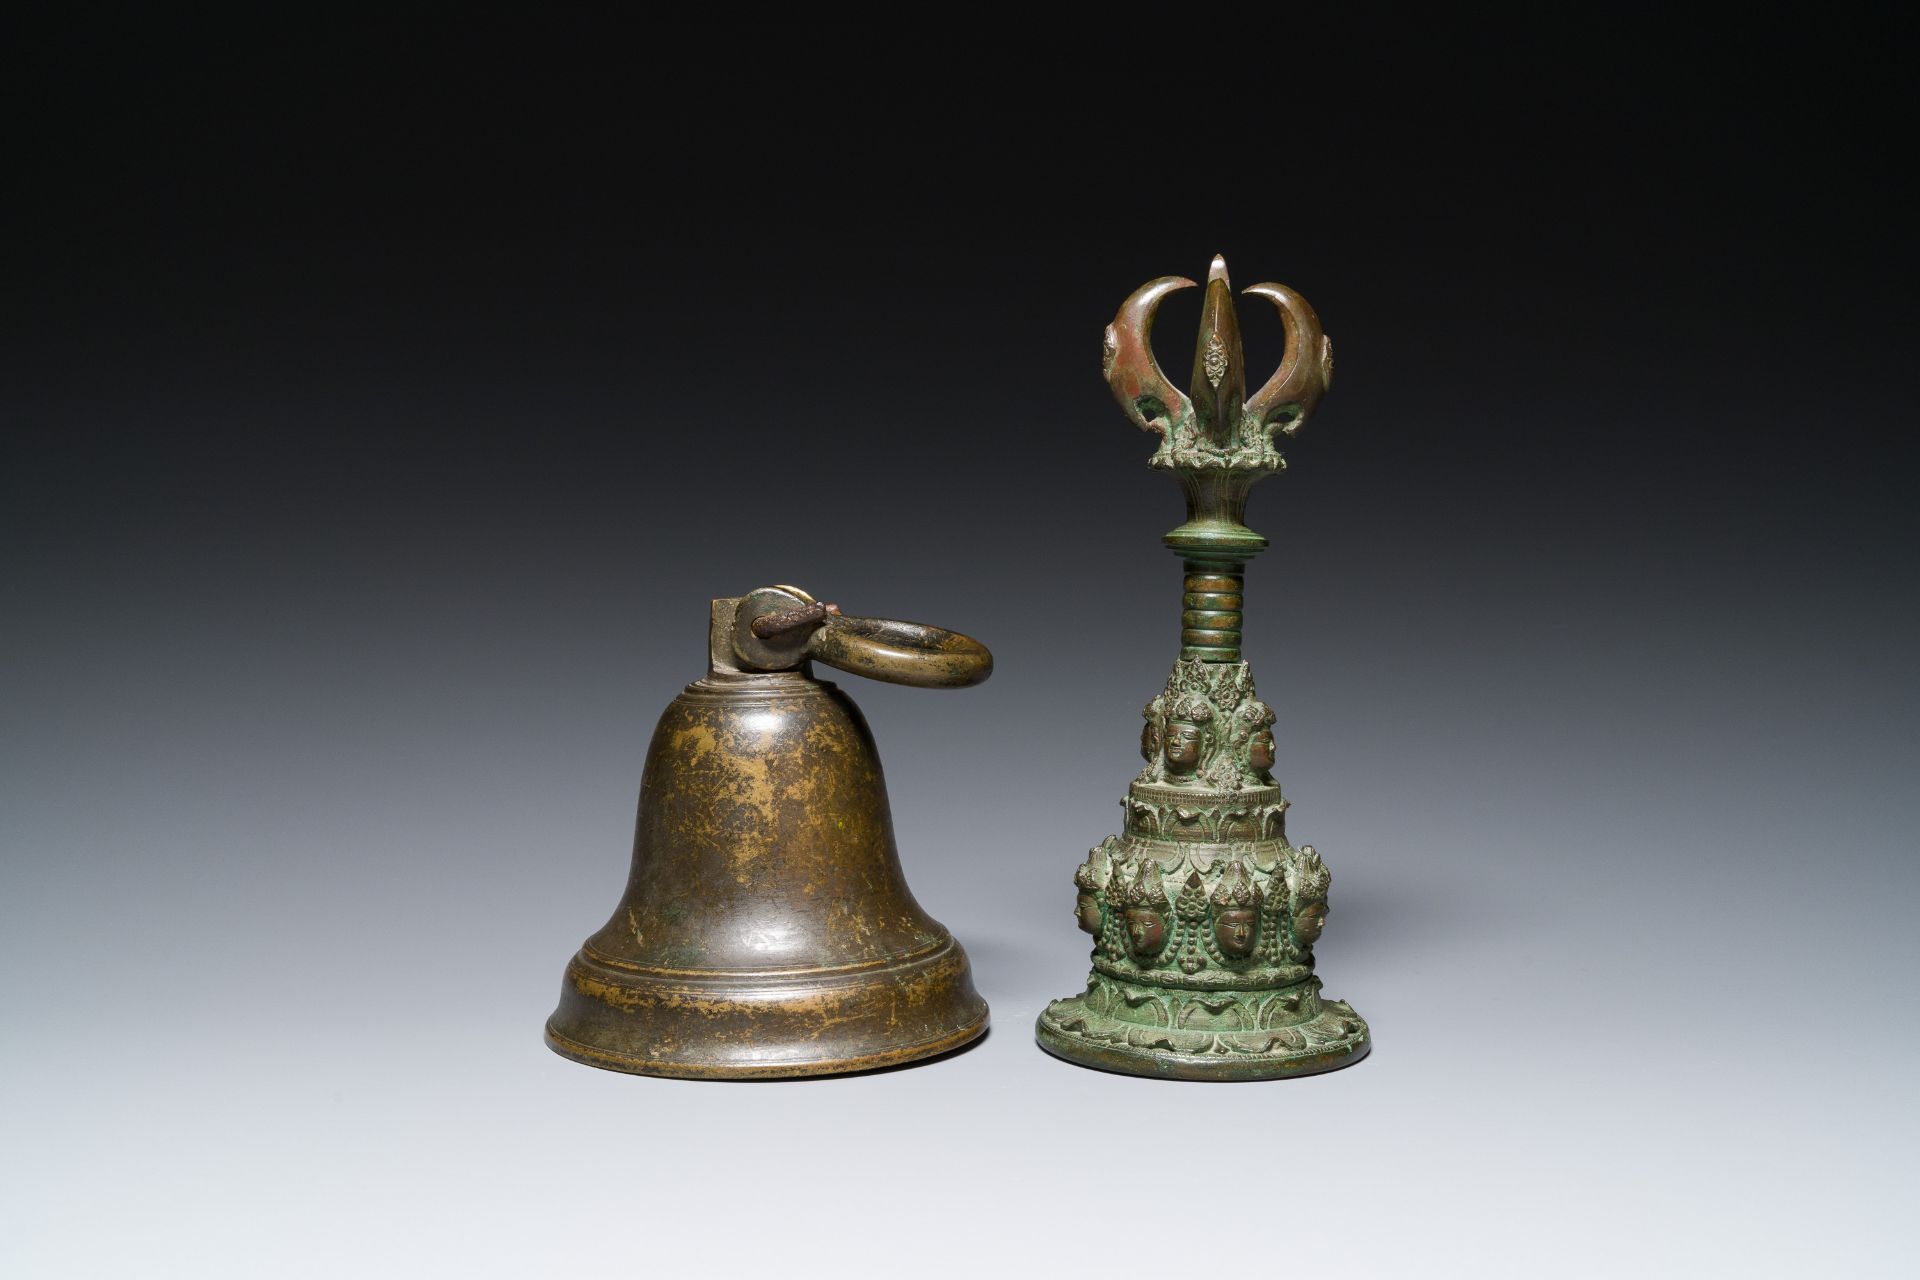 A bronze bell and a ceremonial hand bell, South Asia and Southeast Asia, 19th C. or earlier - Bild 13 aus 21